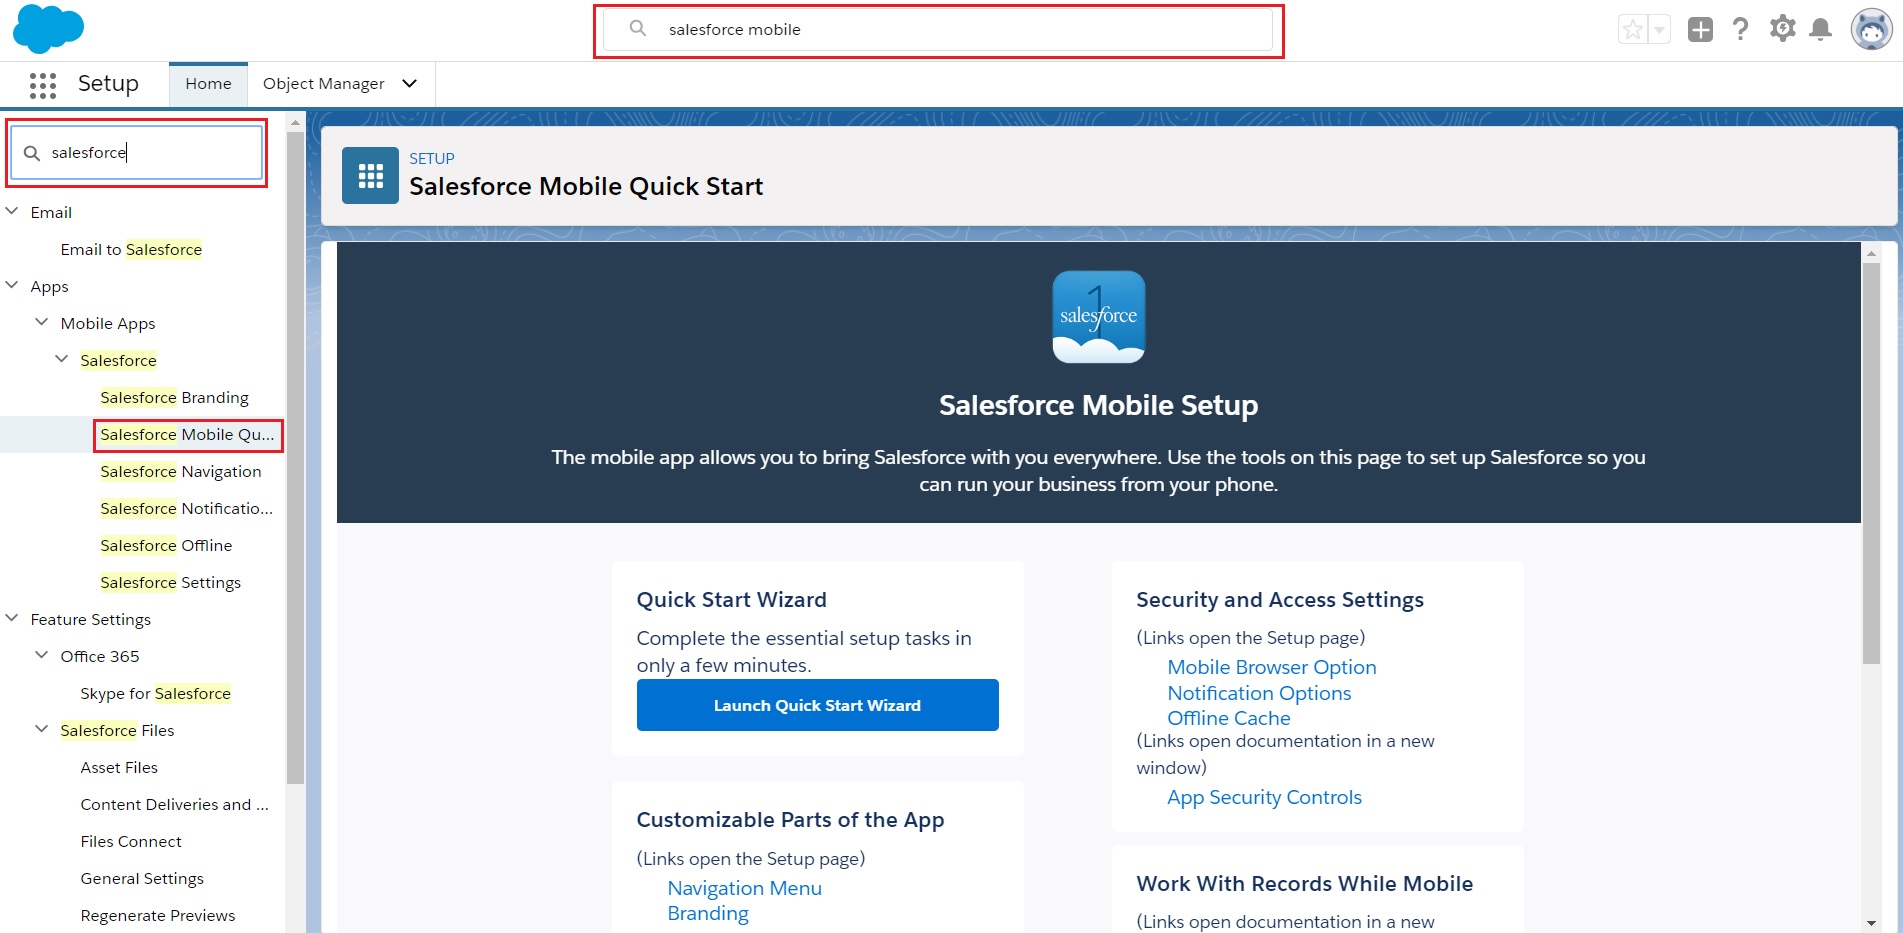 Table Of Contents Sms Magic Converse On Salesforce1 Configure Basic Settings Of Salesforce Mobile App Configuring Basic Settings Of Salesforce Mobile App